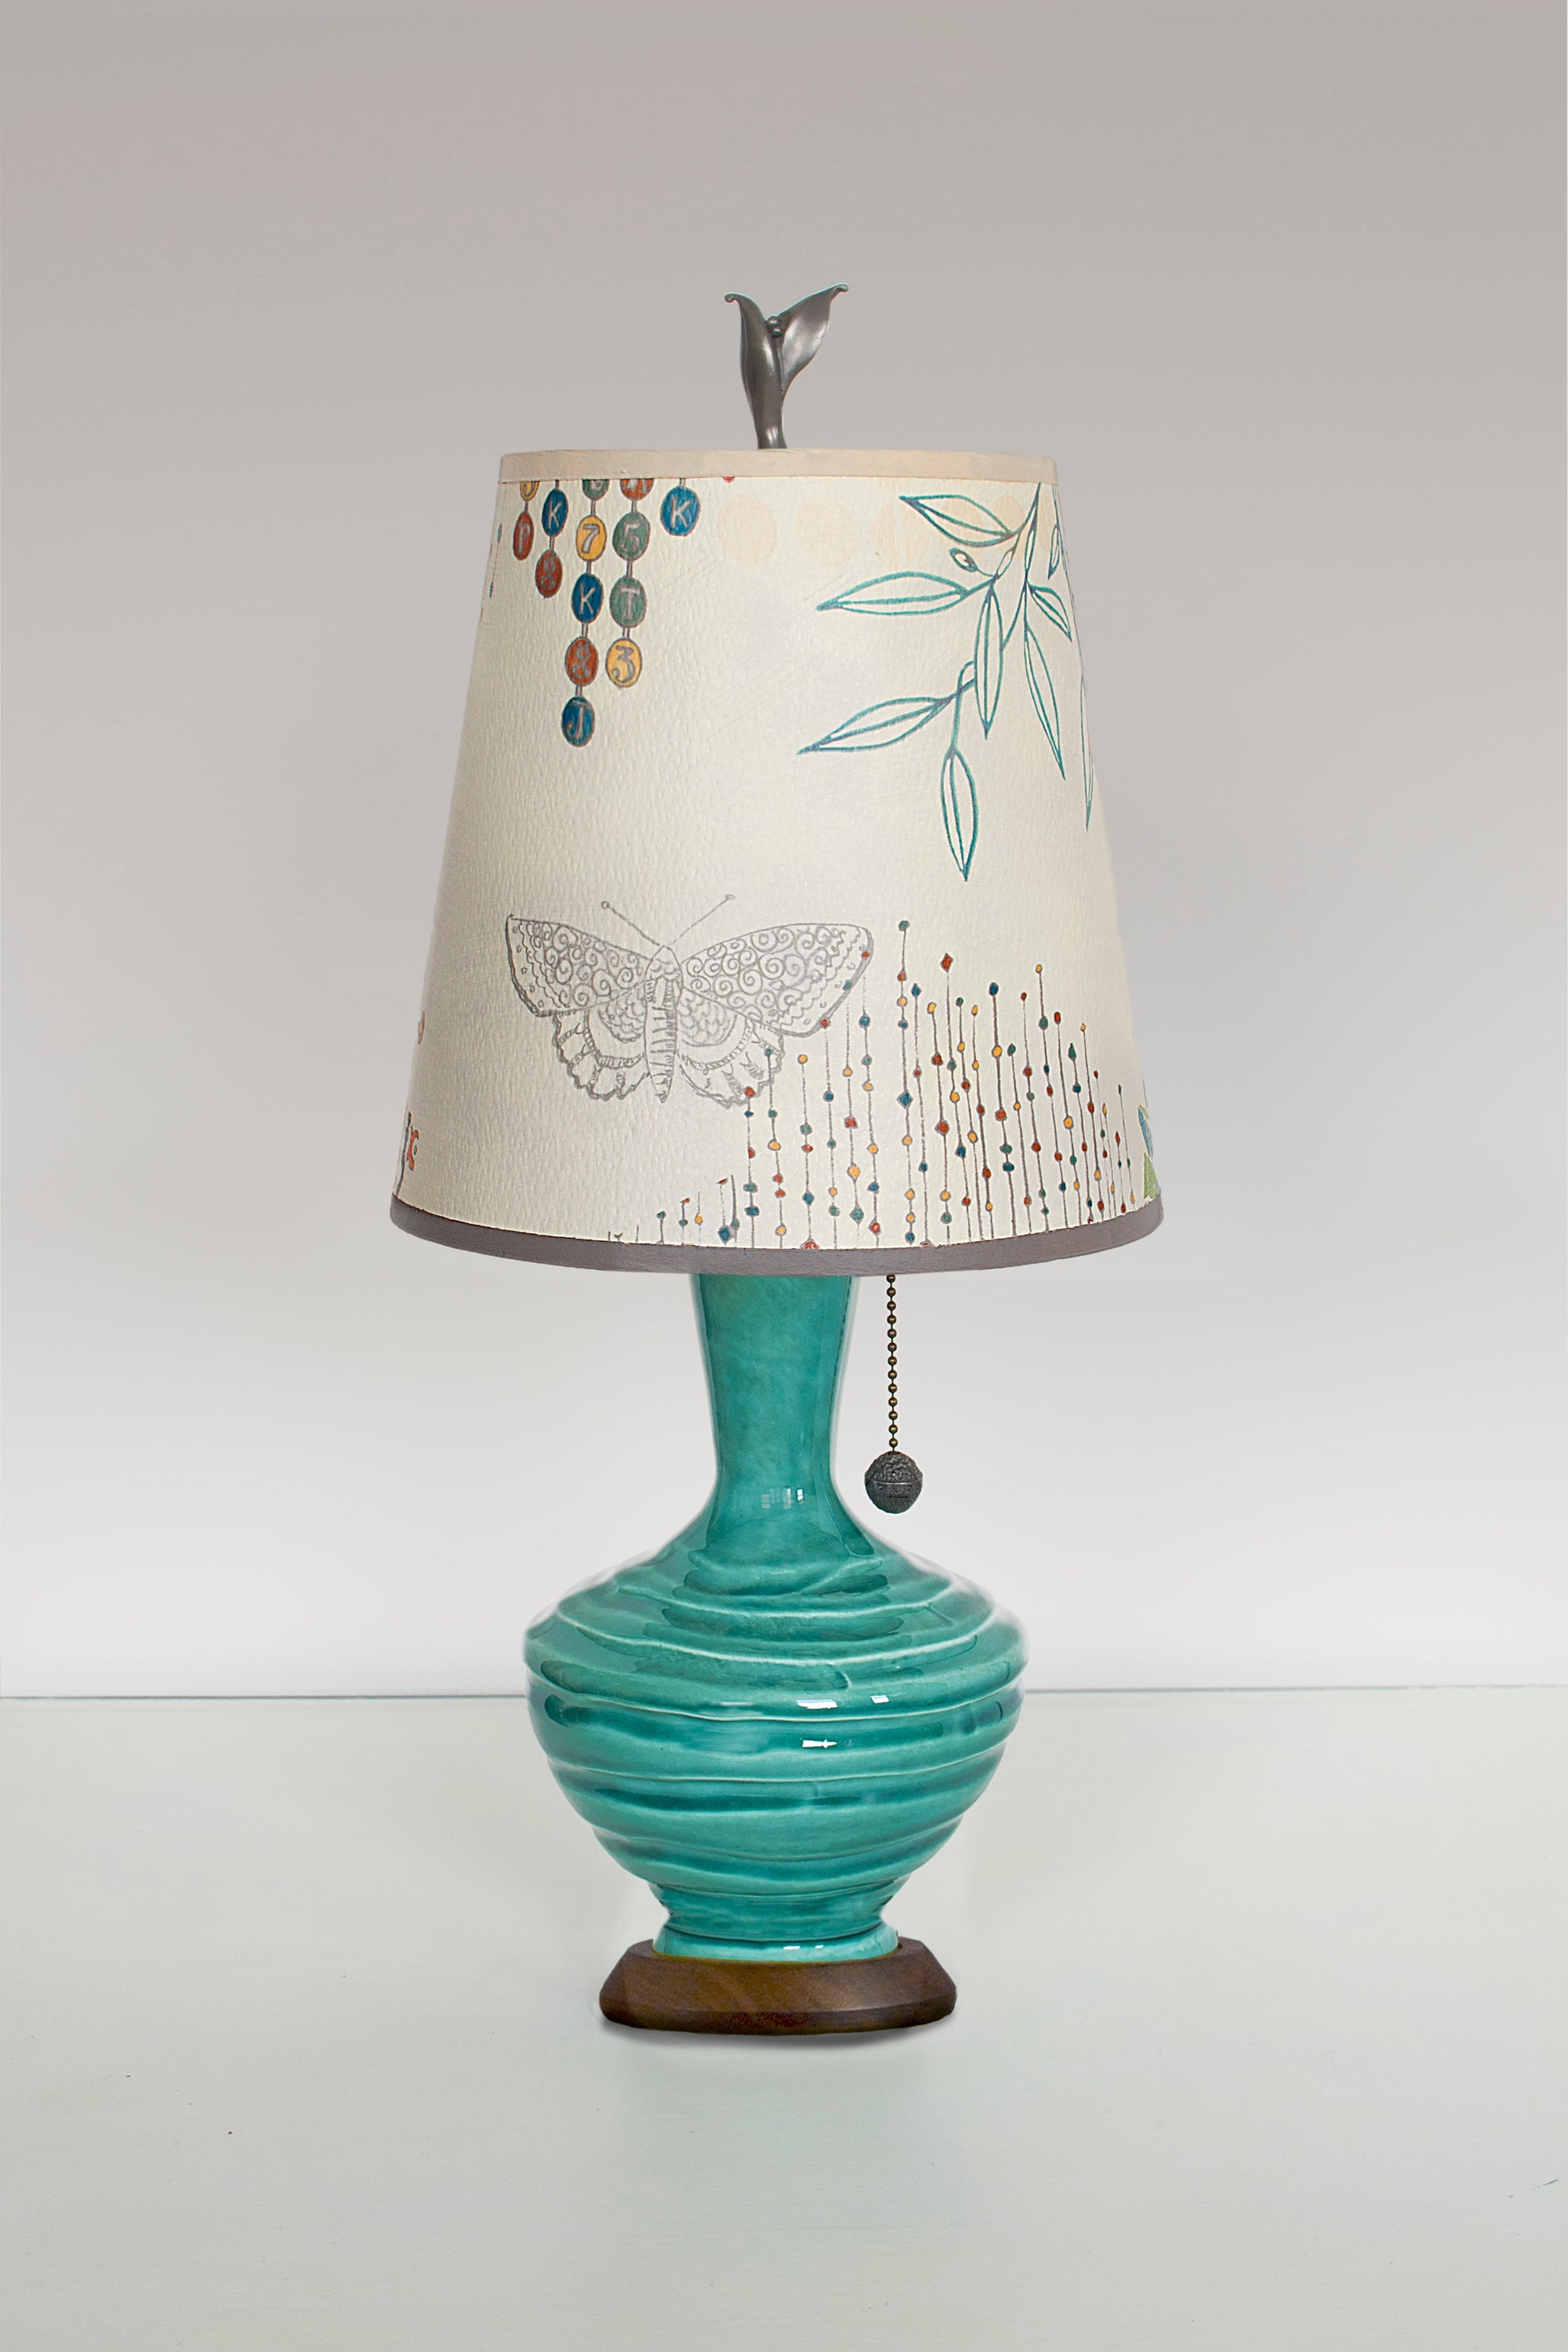 Janna Ugone & Co Table Lamps Ceramic Table Lamp with Small Drum Shade in Ecru Journey